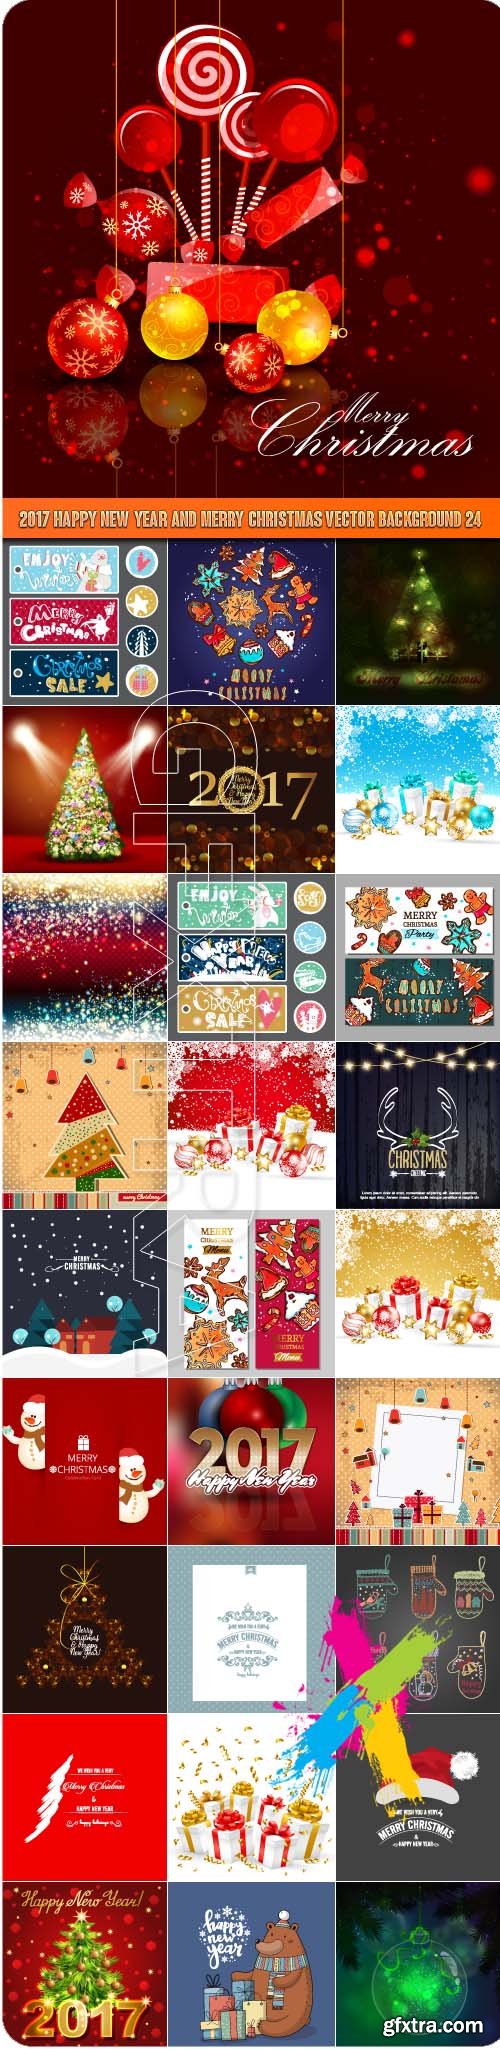 2017 Happy New Year and Merry Christmas vector background 24